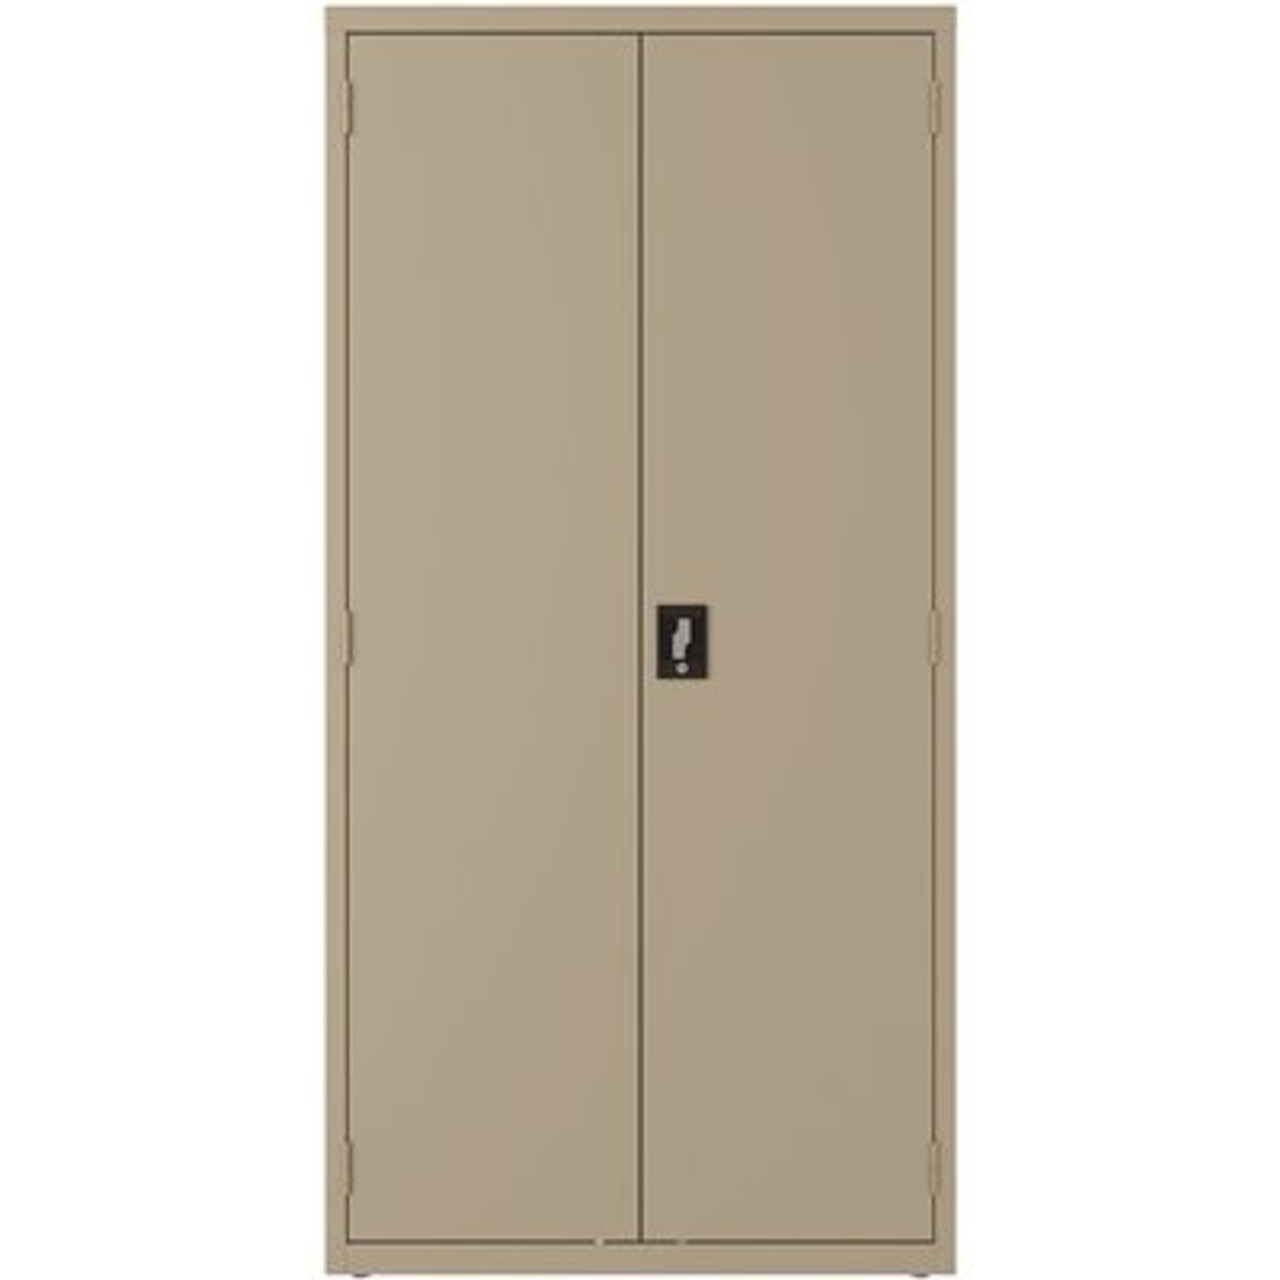 Hirsh 36 In. W X 72 In. H X 18 In. D 5 Shelves Steel Janitorial Freestanding Cabinet In Putty